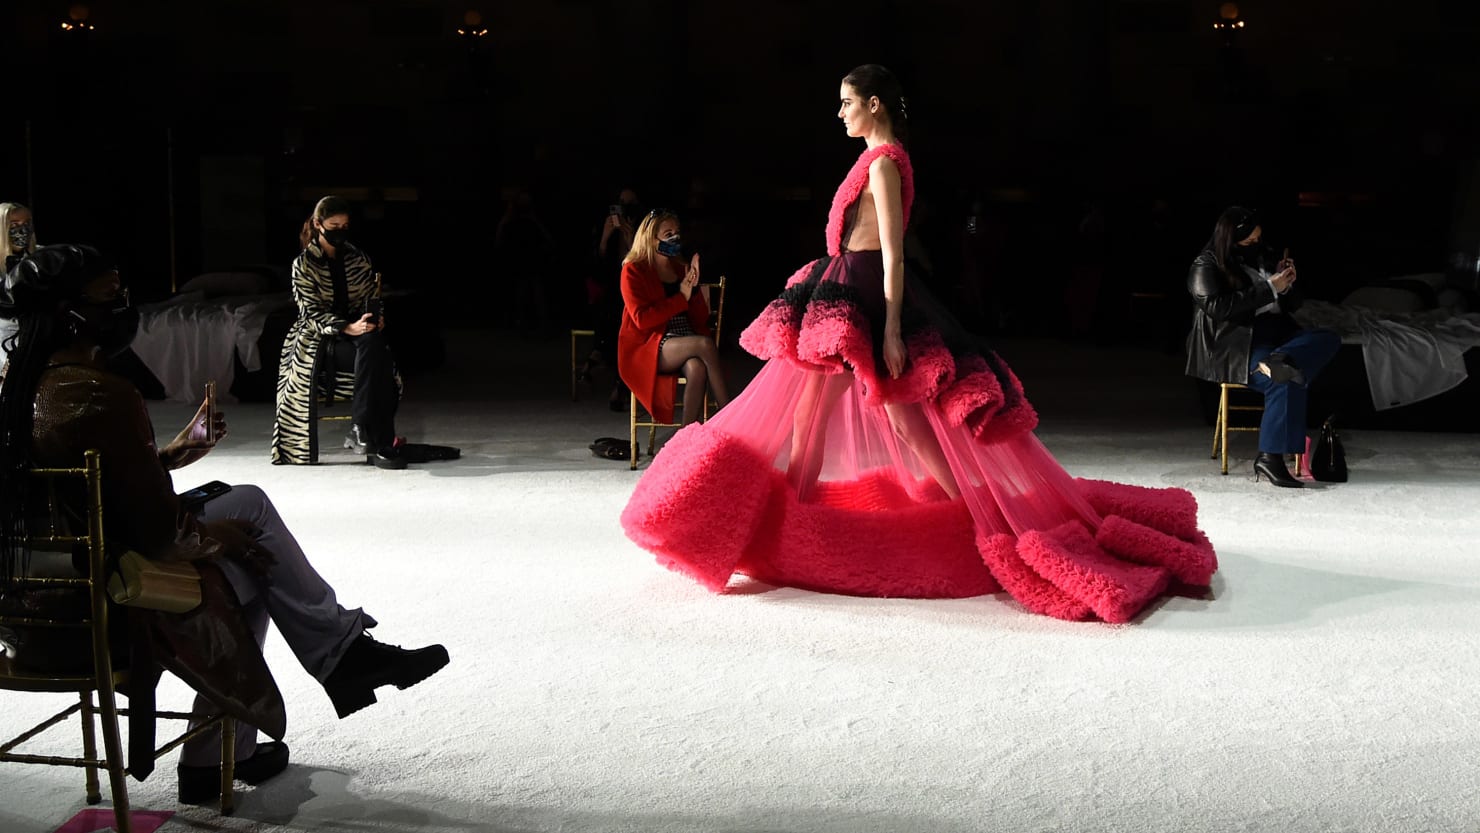 New York Fashion Week Is Back, Even if It’s Having an Identity Crisis